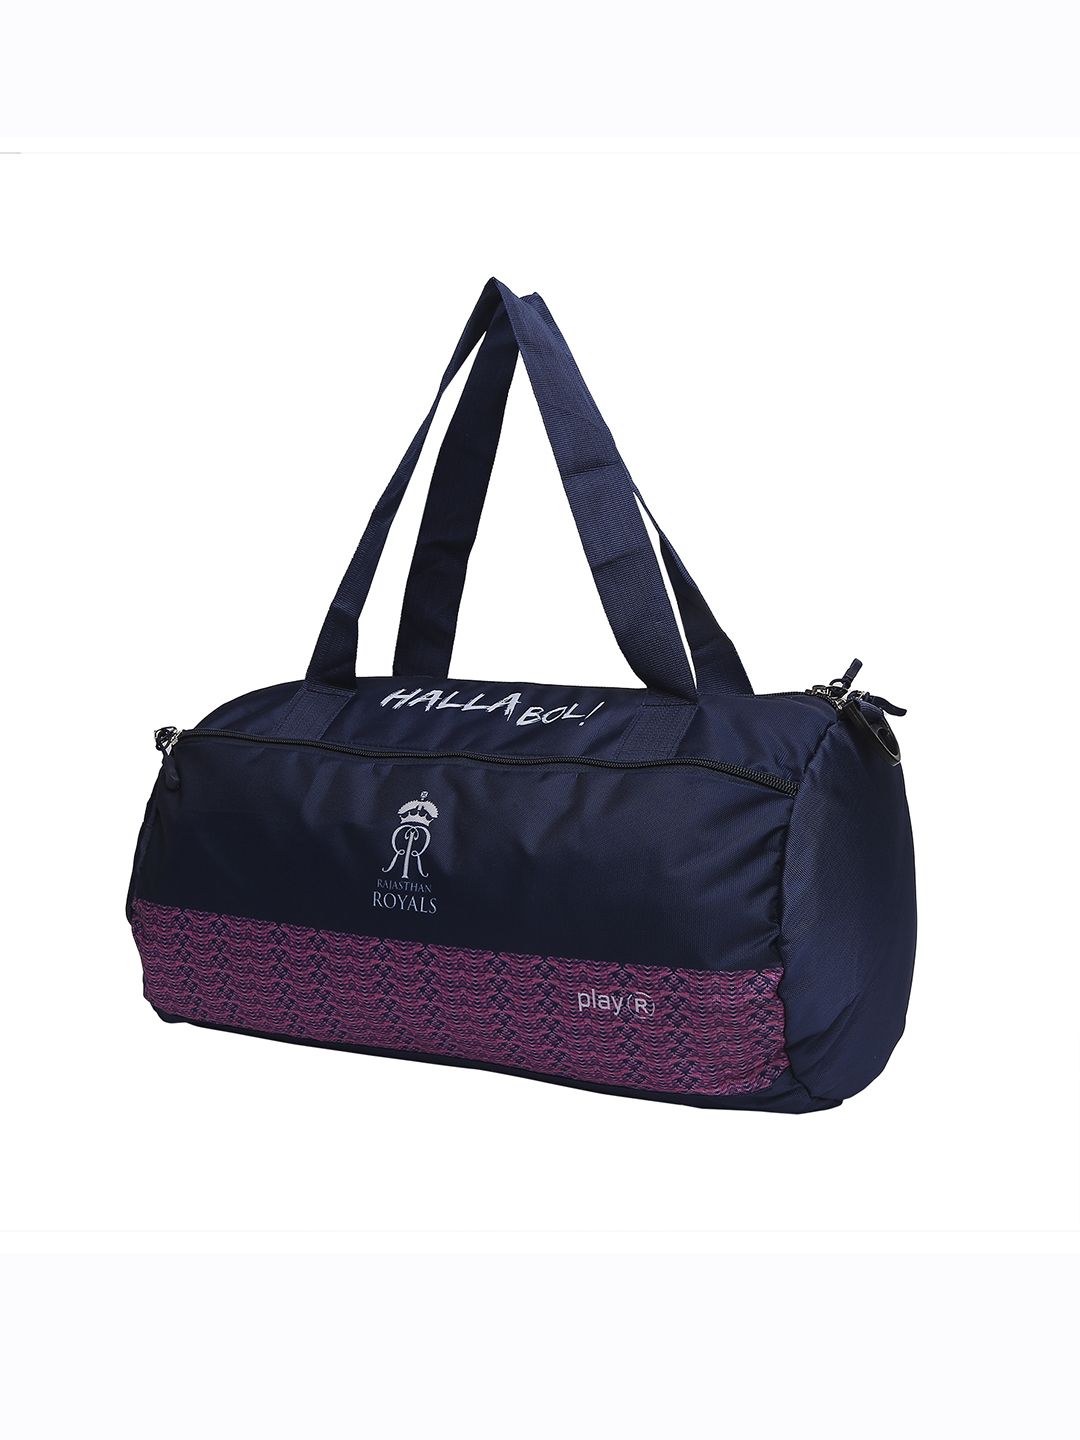 Buy Sports Gym Bag RR From Fancode Shop